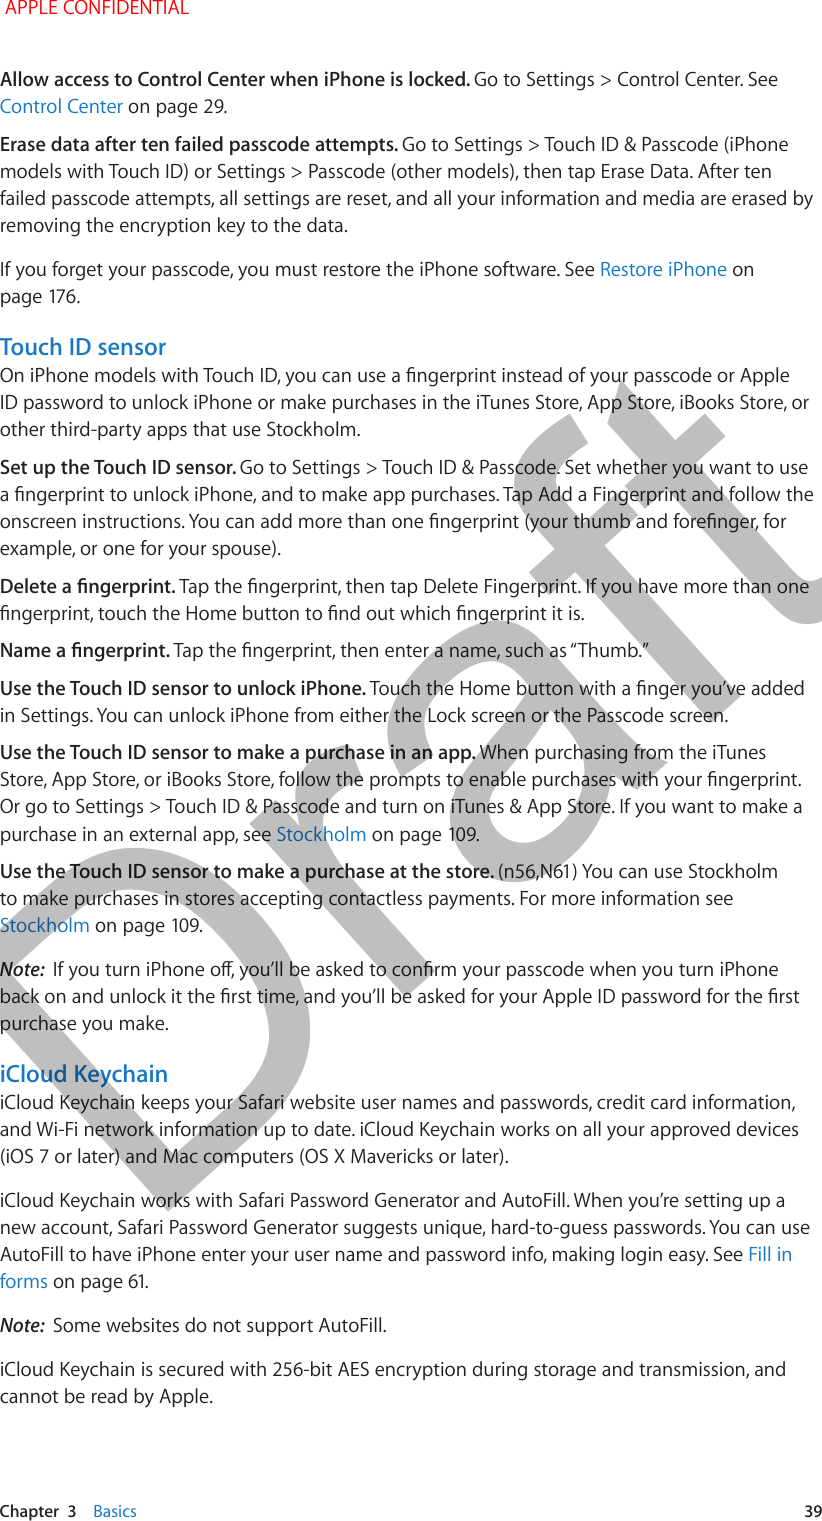   Chapter  3    Basics  39Allow access to Control Center when iPhone is locked. Go to Settings &gt; Control Center. See Control Center on page 29.Erase data after ten failed passcode attempts. Go to Settings &gt; Touch ID &amp; Passcode (iPhone models with Touch ID) or Settings &gt; Passcode (other models), then tap Erase Data. After ten failed passcode attempts, all settings are reset, and all your information and media are erased by removing the encryption key to the data.If you forget your passcode, you must restore the iPhone software. See Restore iPhone on Touch ID sensorID password to unlock iPhone or make purchases in the iTunes Store, App Store, iBooks Store, or other third-party apps that use Stockholm. Set up the Touch ID sensor. Go to Settings &gt; Touch ID &amp; Passcode. Set whether you want to use example, or one for your spouse). Use the Touch ID sensor to unlock iPhone. in Settings. You can unlock iPhone from either the Lock screen or the Passcode screen.Use the Touch ID sensor to make a purchase in an app. When purchasing from the iTunes Or go to Settings &gt; Touch ID &amp; Passcode and turn on iTunes &amp; App Store. If you want to make a purchase in an external app, see StockholmUse the Touch ID sensor to make a purchase at the store. to make purchases in stores accepting contactless payments. For more information see StockholmNote:  purchase you make.iCloud KeychainiCloud Keychain keeps your Safari website user names and passwords, credit card information, and Wi-Fi network information up to date. iCloud Keychain works on all your approved devices iCloud Keychain works with Safari Password Generator and AutoFill. When you’re setting up a new account, Safari Password Generator suggests unique, hard-to-guess passwords. You can use AutoFill to have iPhone enter your user name and password info, making login easy. See Fill in formsNote:  Some websites do not support AutoFill.iCloud Keychain is secured with 256-bit AES encryption during storage and transmission, and cannot be read by Apple. APPLE CONFIDENTIALDraft